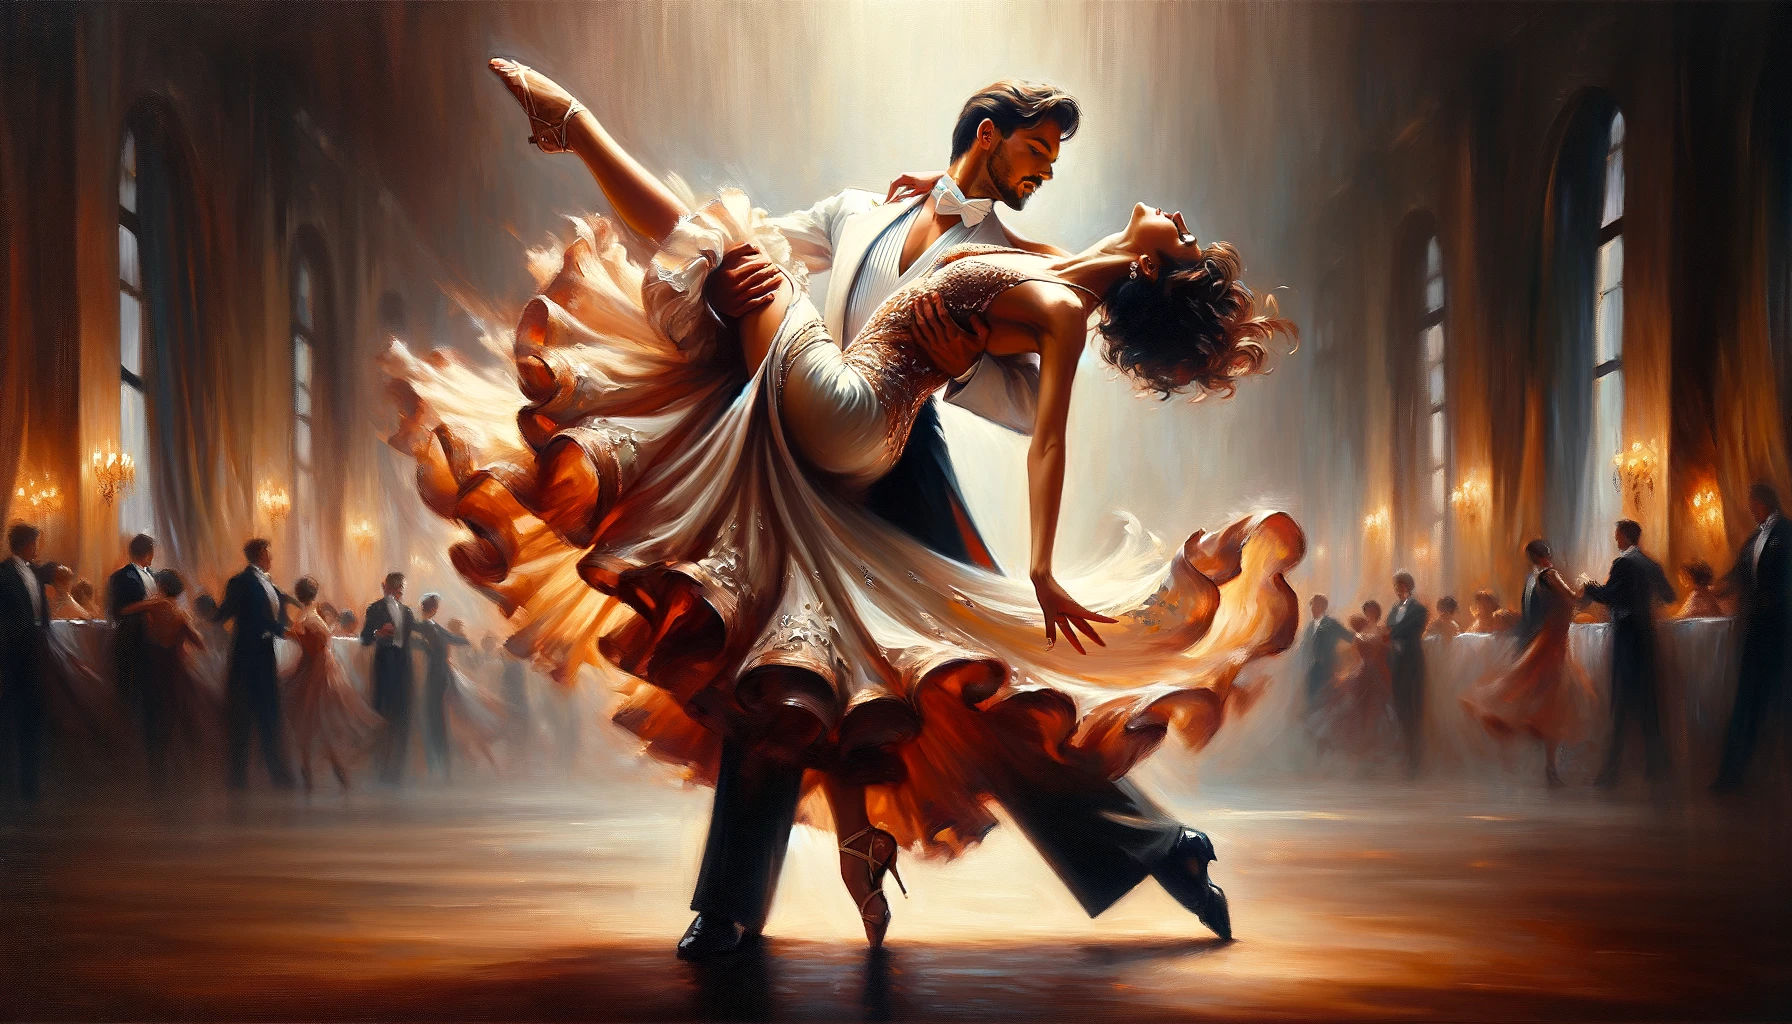 a painting of a man ballroom dancing with a woman